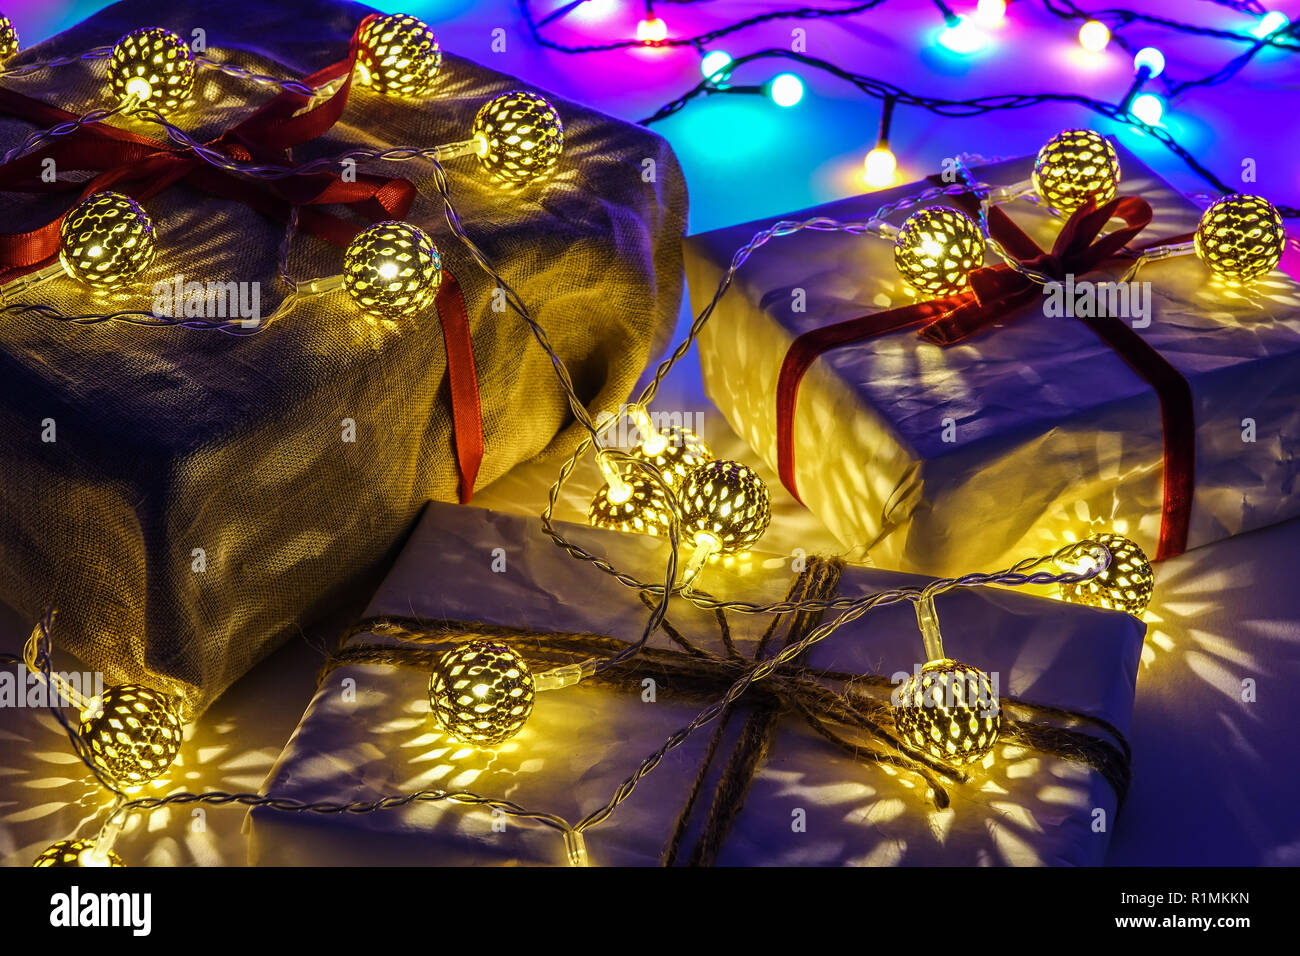 Christmas Lights All Over Yellow Wrapping Paper 